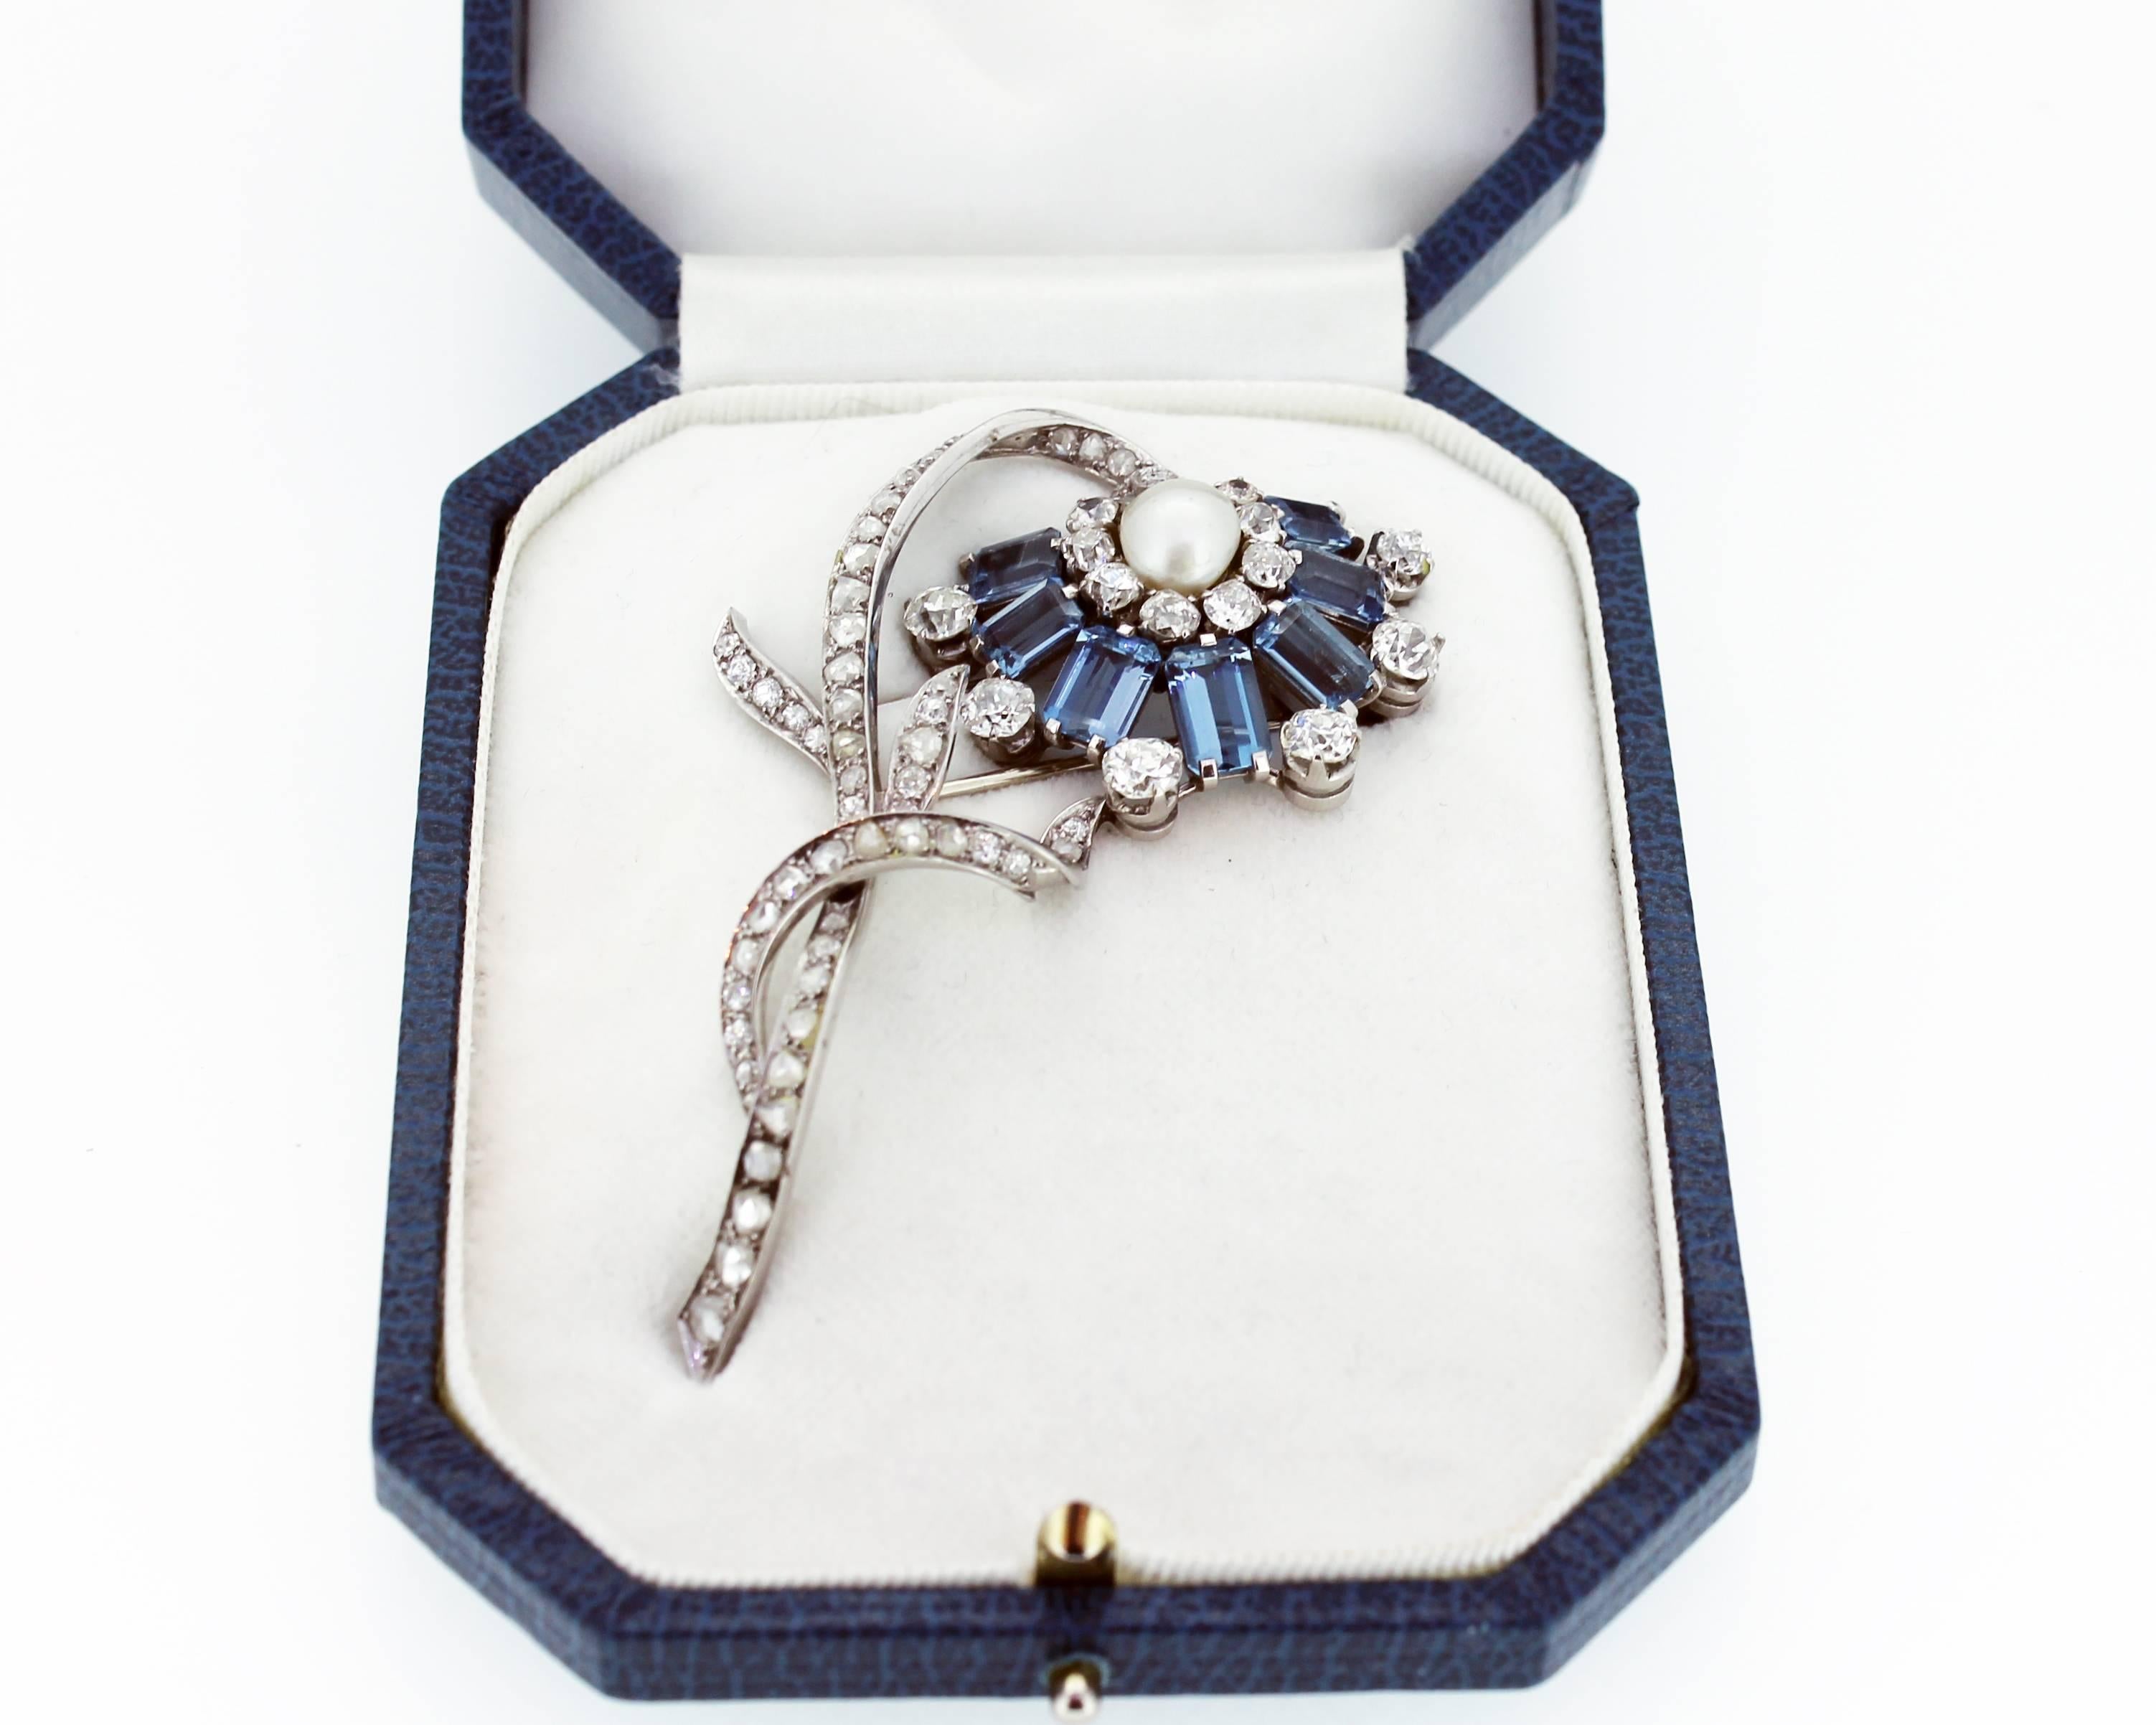 Art Deco aquamarine, pearl and diamond flower brooch mounted in platinum. English. Circa 1930. The central saltwater pearl surrounded by aquamarine and diamond petals and a rose cut diamond set stem. The whole brooch realistically modelled as a